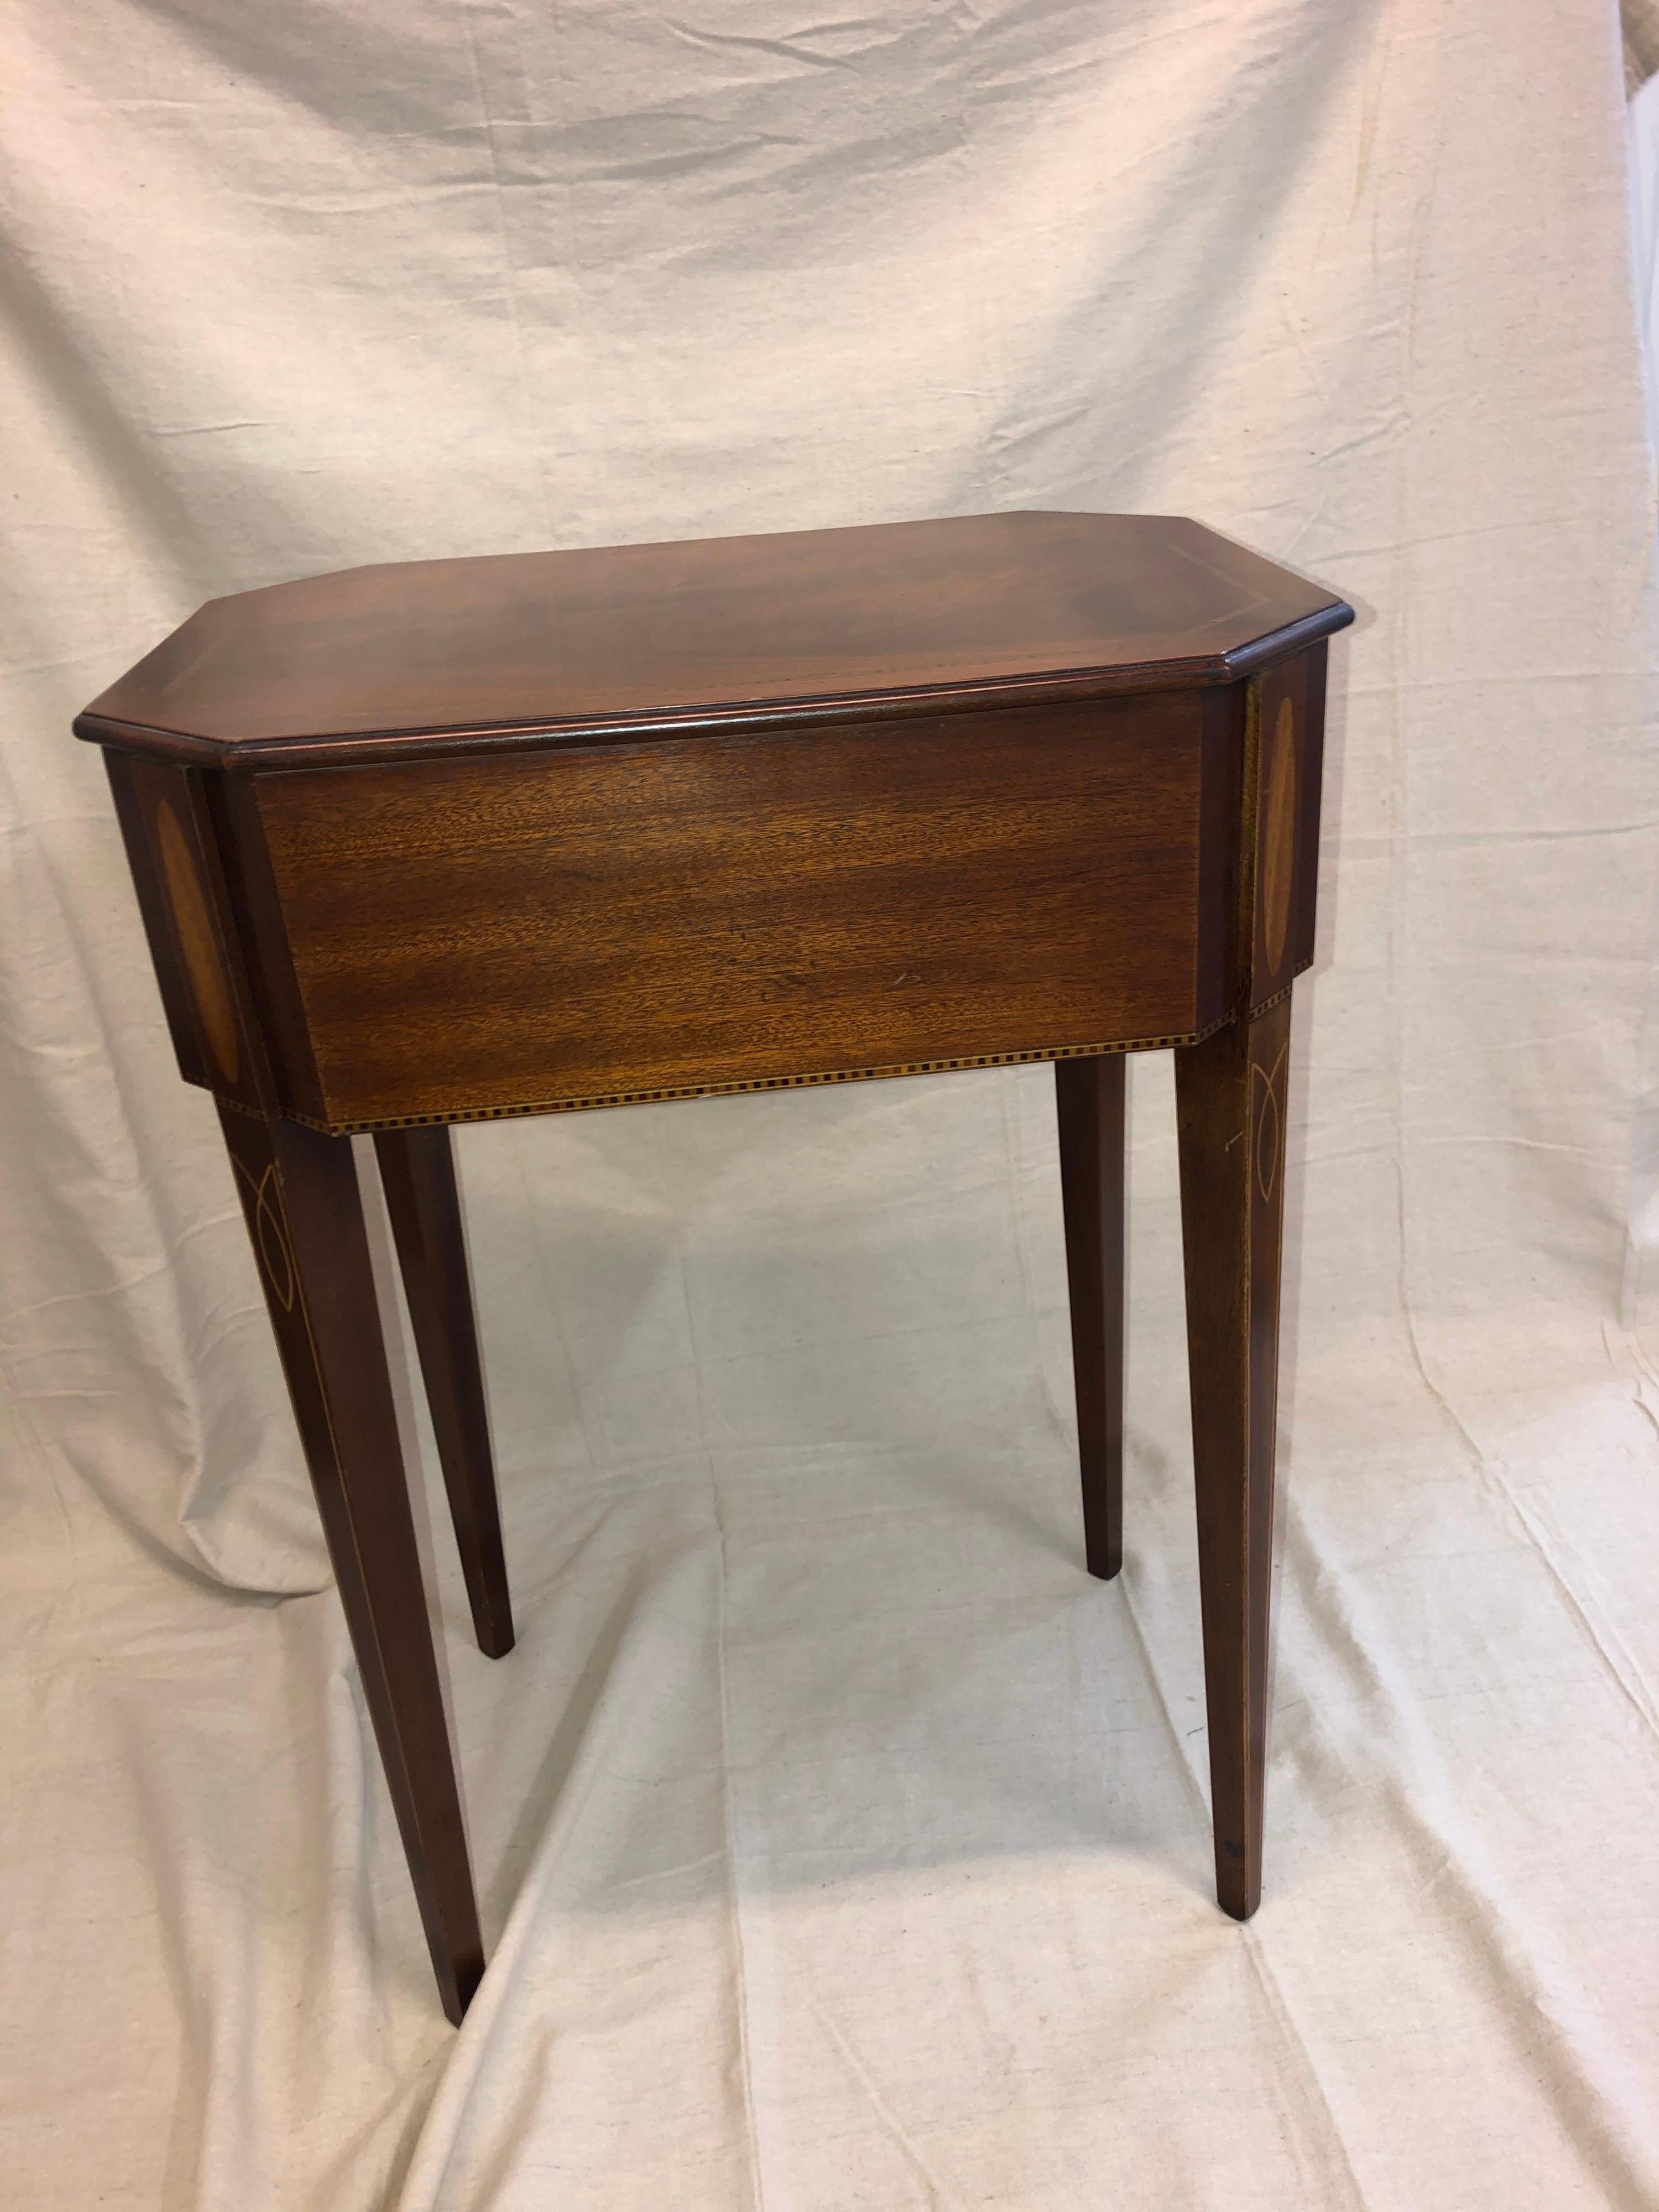 Antique Inlaid Sheraton End Table/Nightstand 2